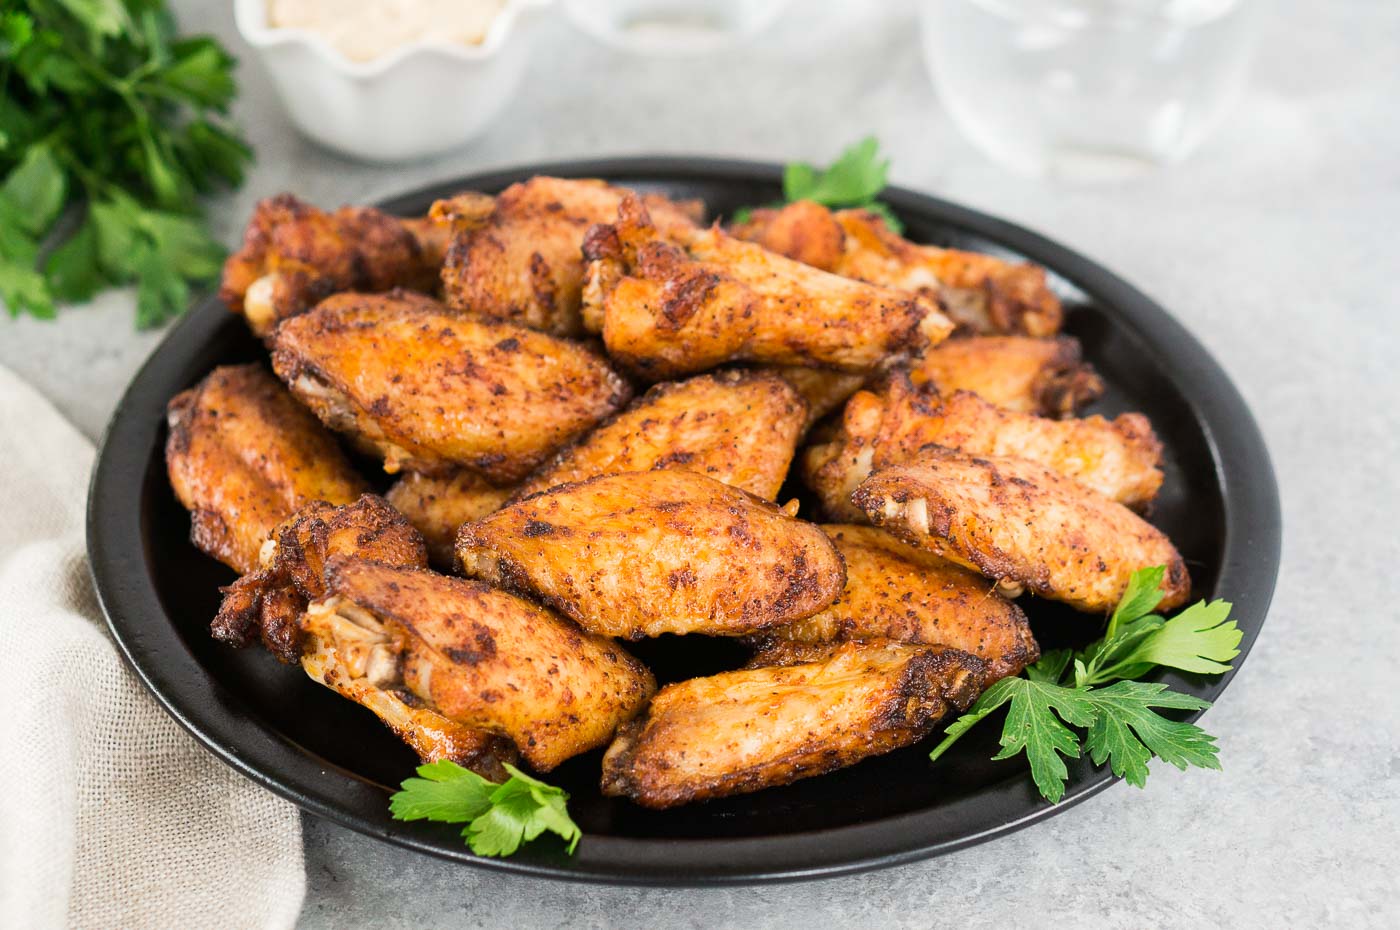 baked crispy wings on a plate